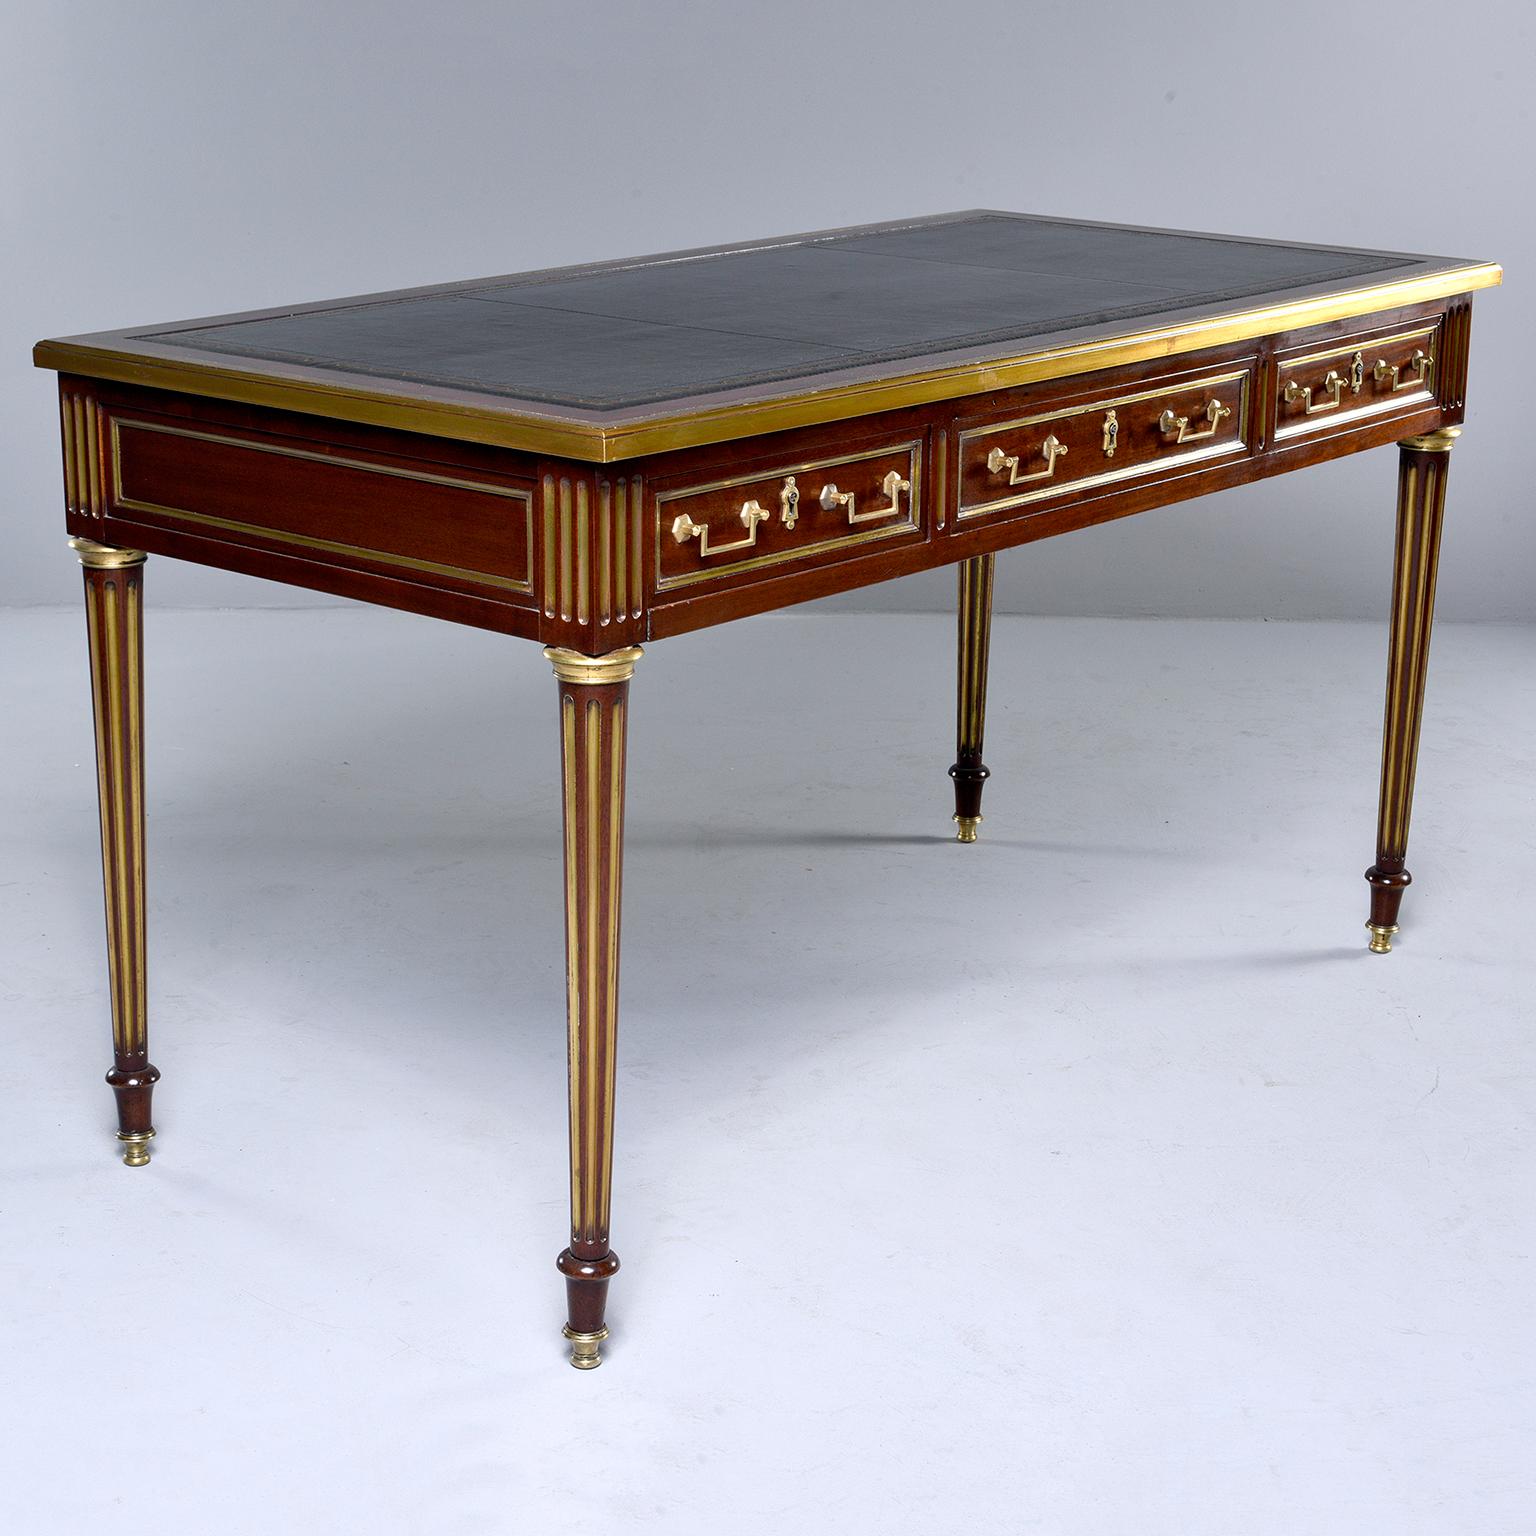 Louis XVI style mahogany desk has a new black leather top, brass trim and hardware, three functional drawers with dovetail construction, tapered, reeded and gilded legs and brass foot caps, circa 1850s. Knee height is 24.25”.